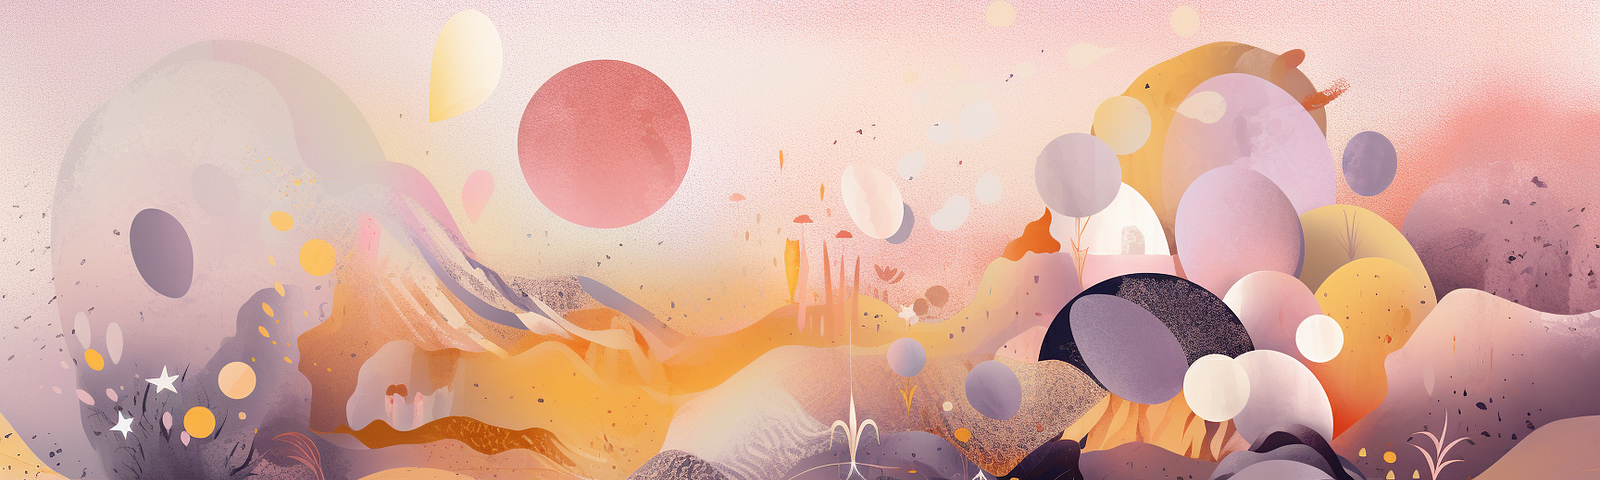 An abstract scene in light yellow and purple pastel colors and illustrated in magazine style.